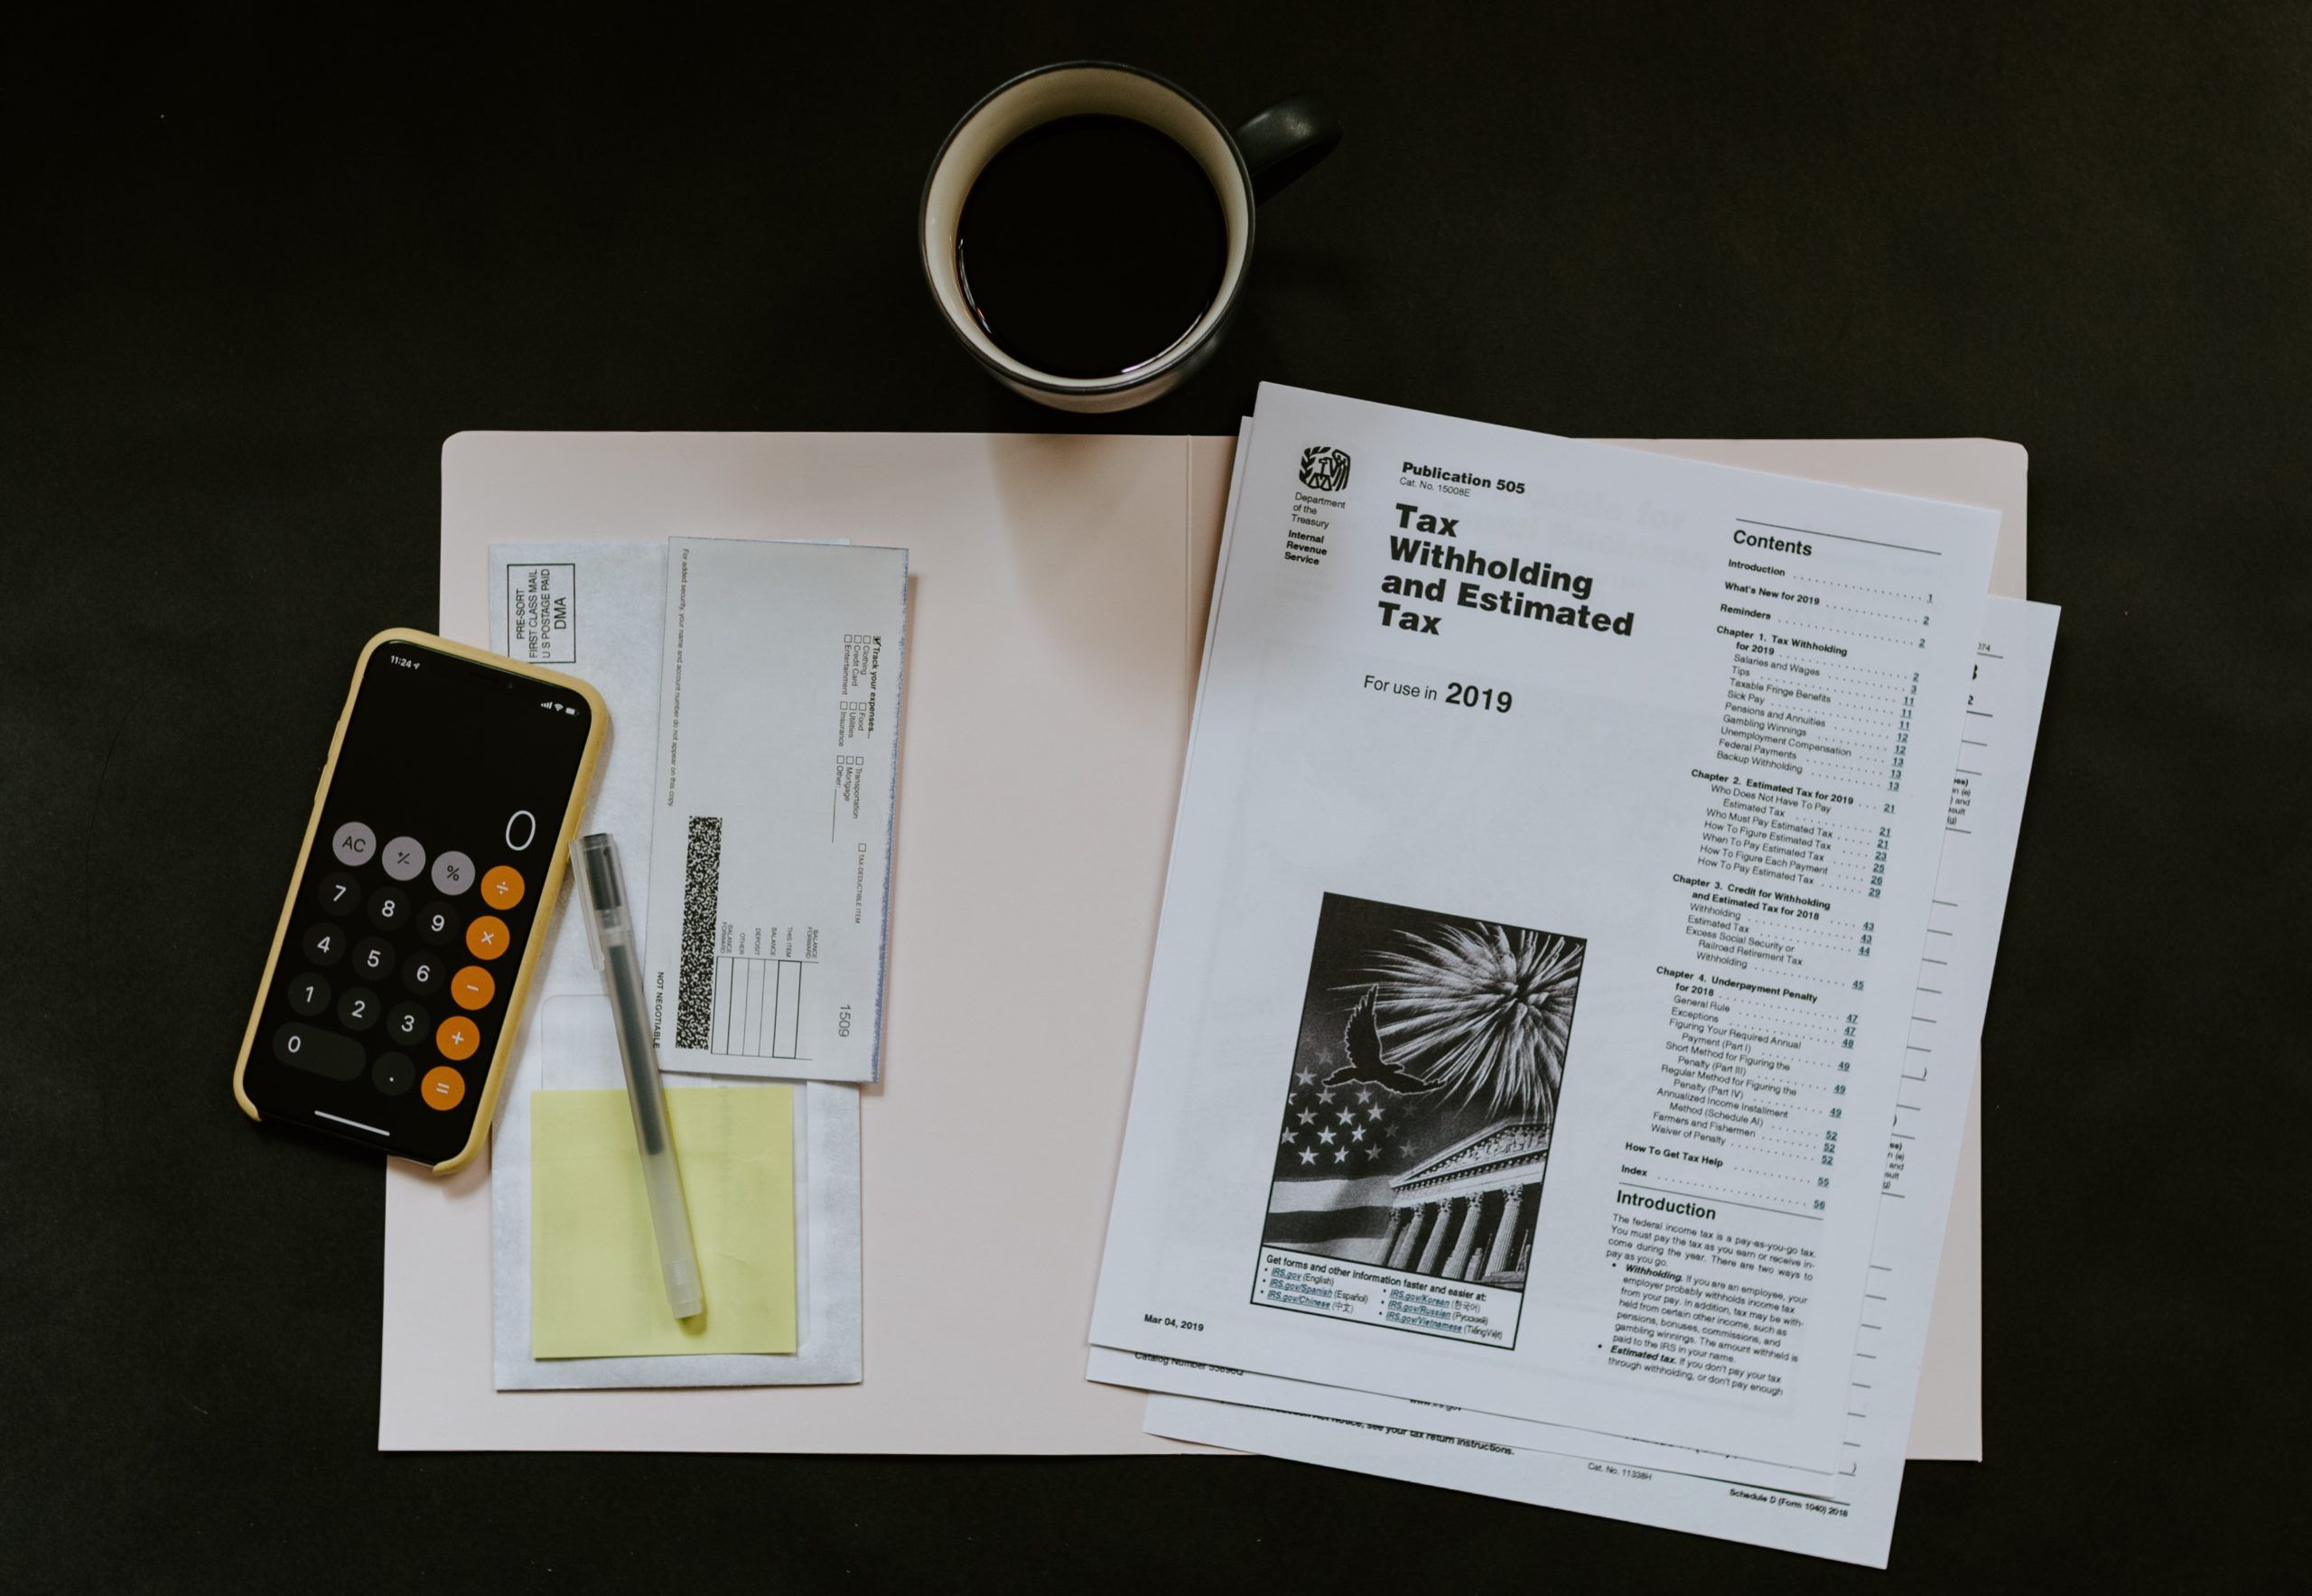 Coffee, tax withholding papers, and a calculator